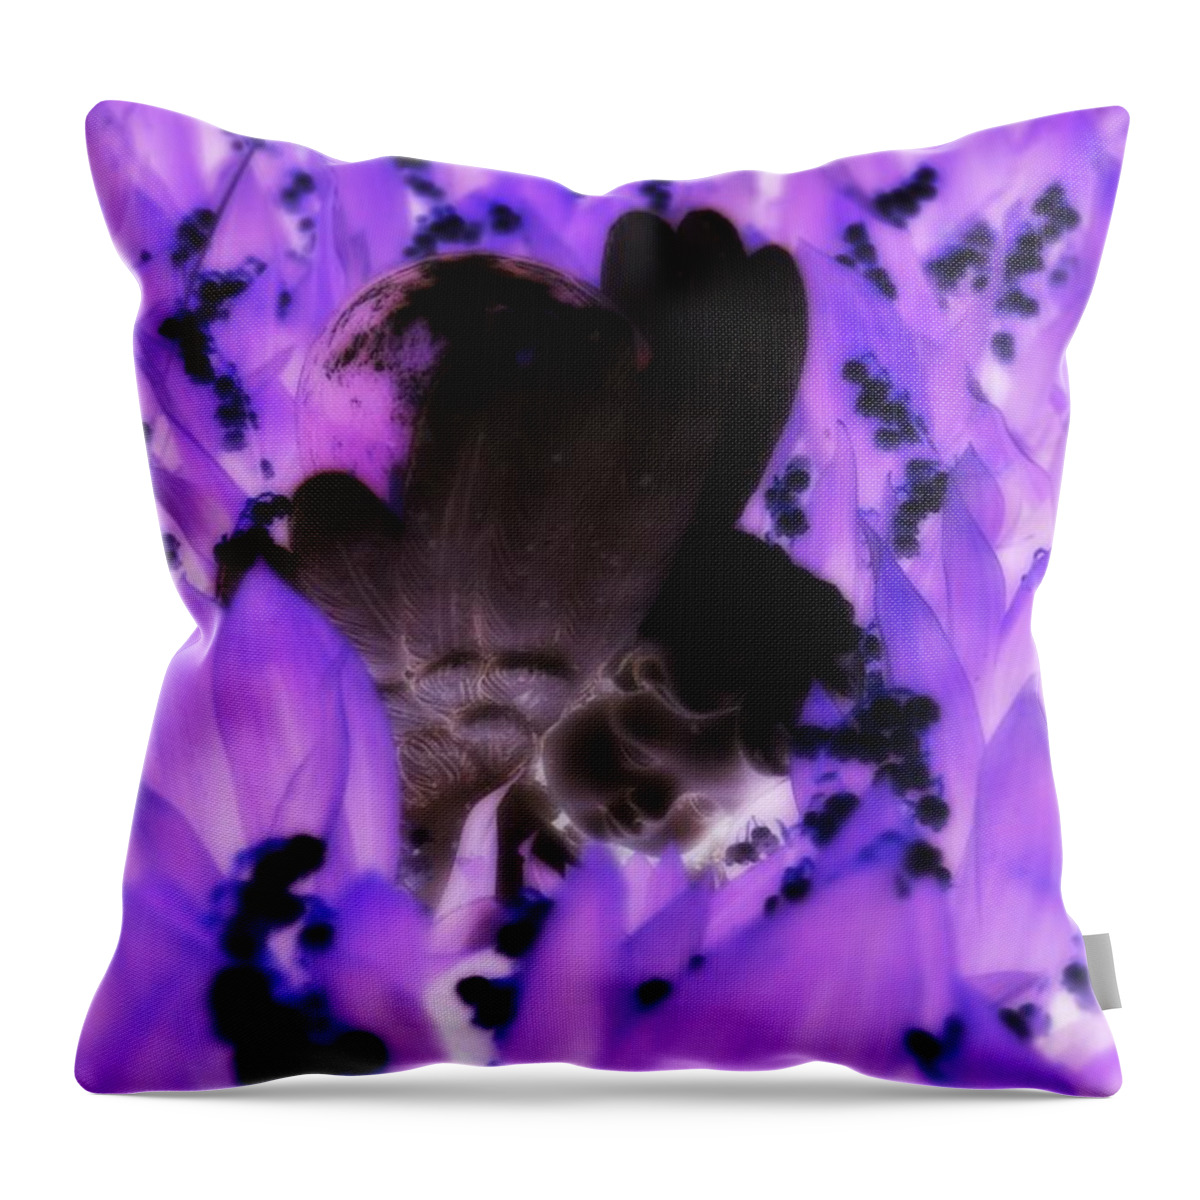 Angel Throw Pillow featuring the photograph Angel Negative by Steven Clipperton